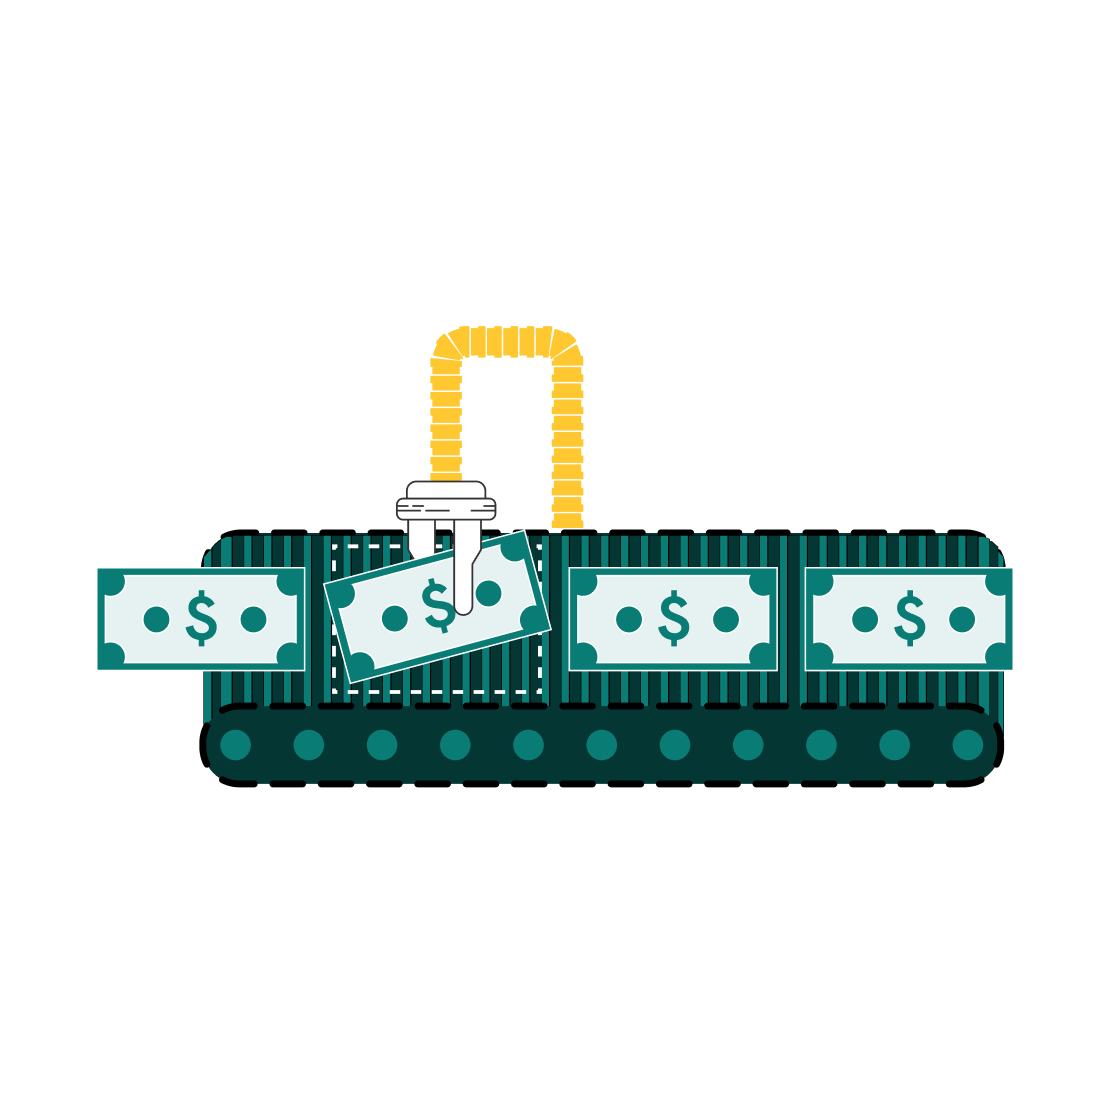 An illustration of a conveyer belt with some bills